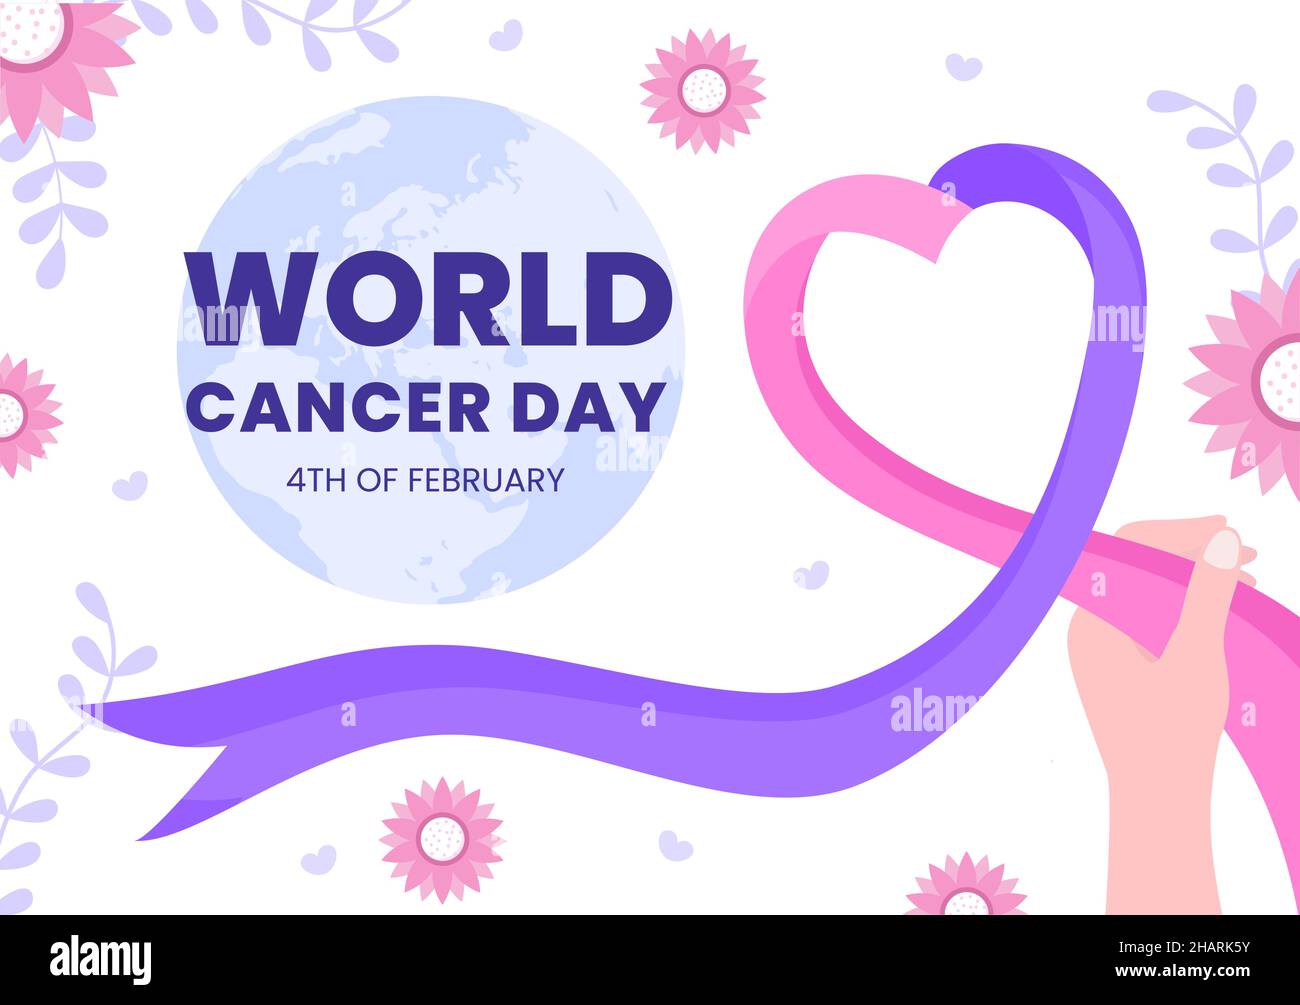 World Cancer Day with Ribbon Flat Vector Illustration. Inform the Public About Disease Awareness on February 4th Through Campaign Background or Poster Stock Vector